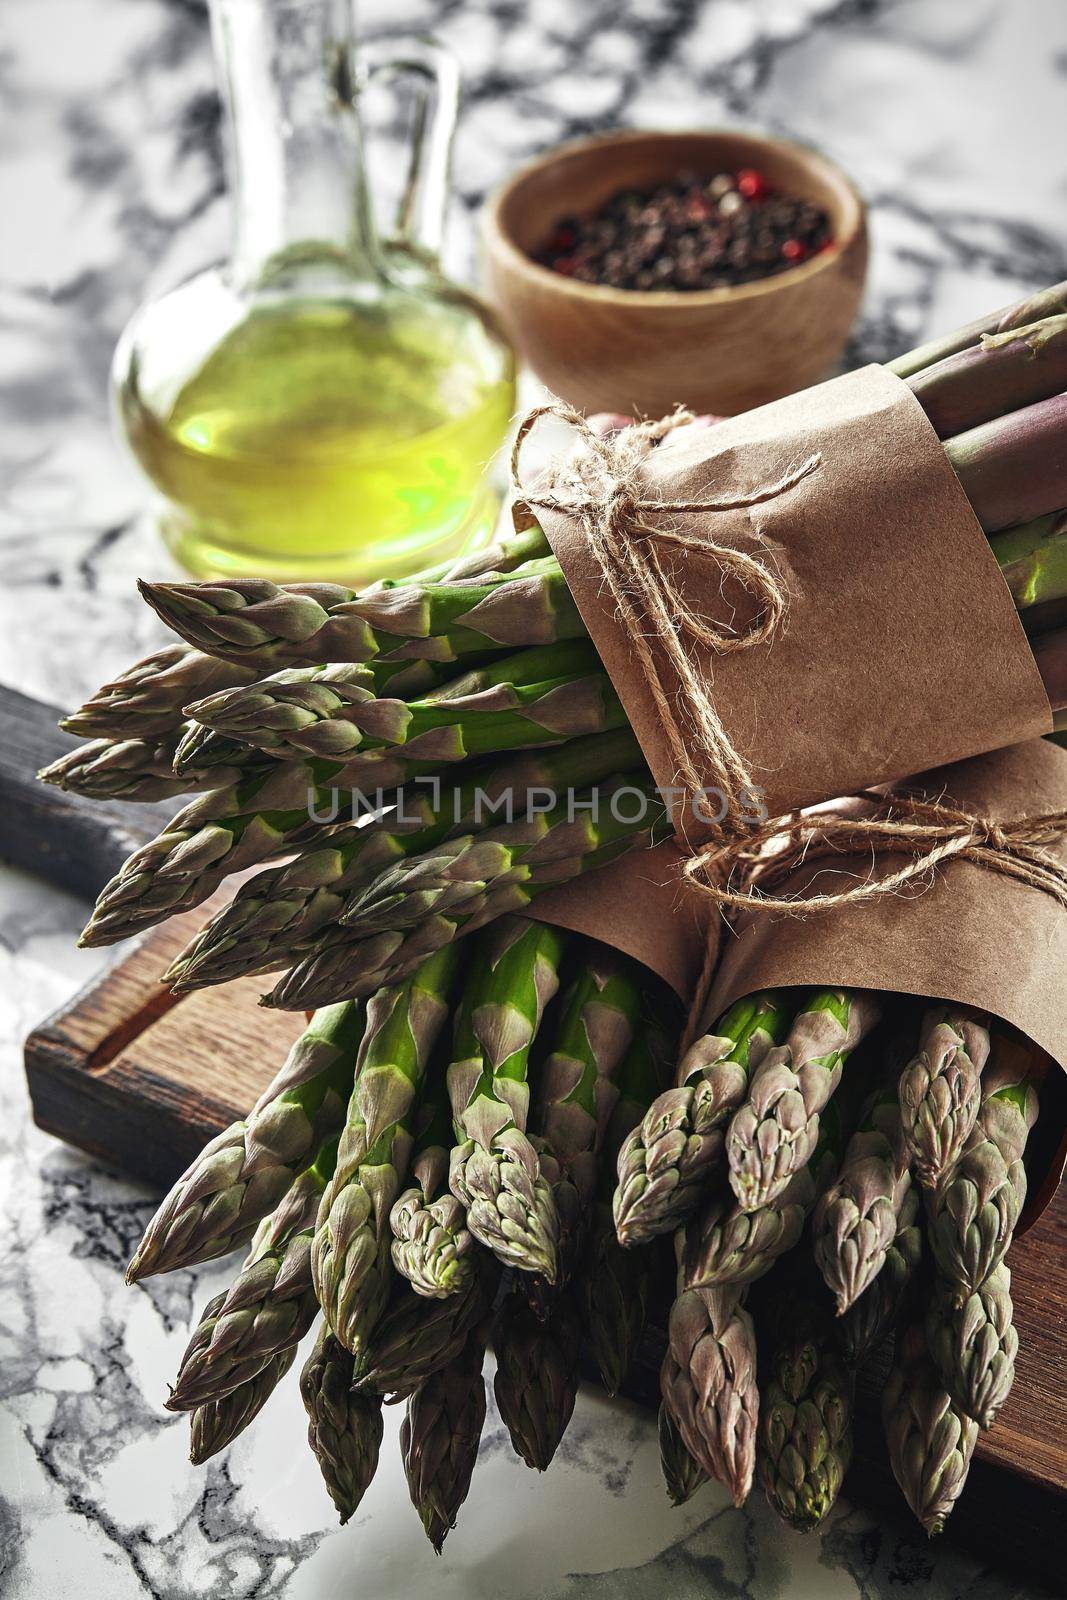 Bunch of an edible, ripe stalks of asparagus on a wooden board, marble background. Fresh, green vegetables with olive oil and seasonings, top view. Healthy eating. Spring harvest, agricultural farming concept.